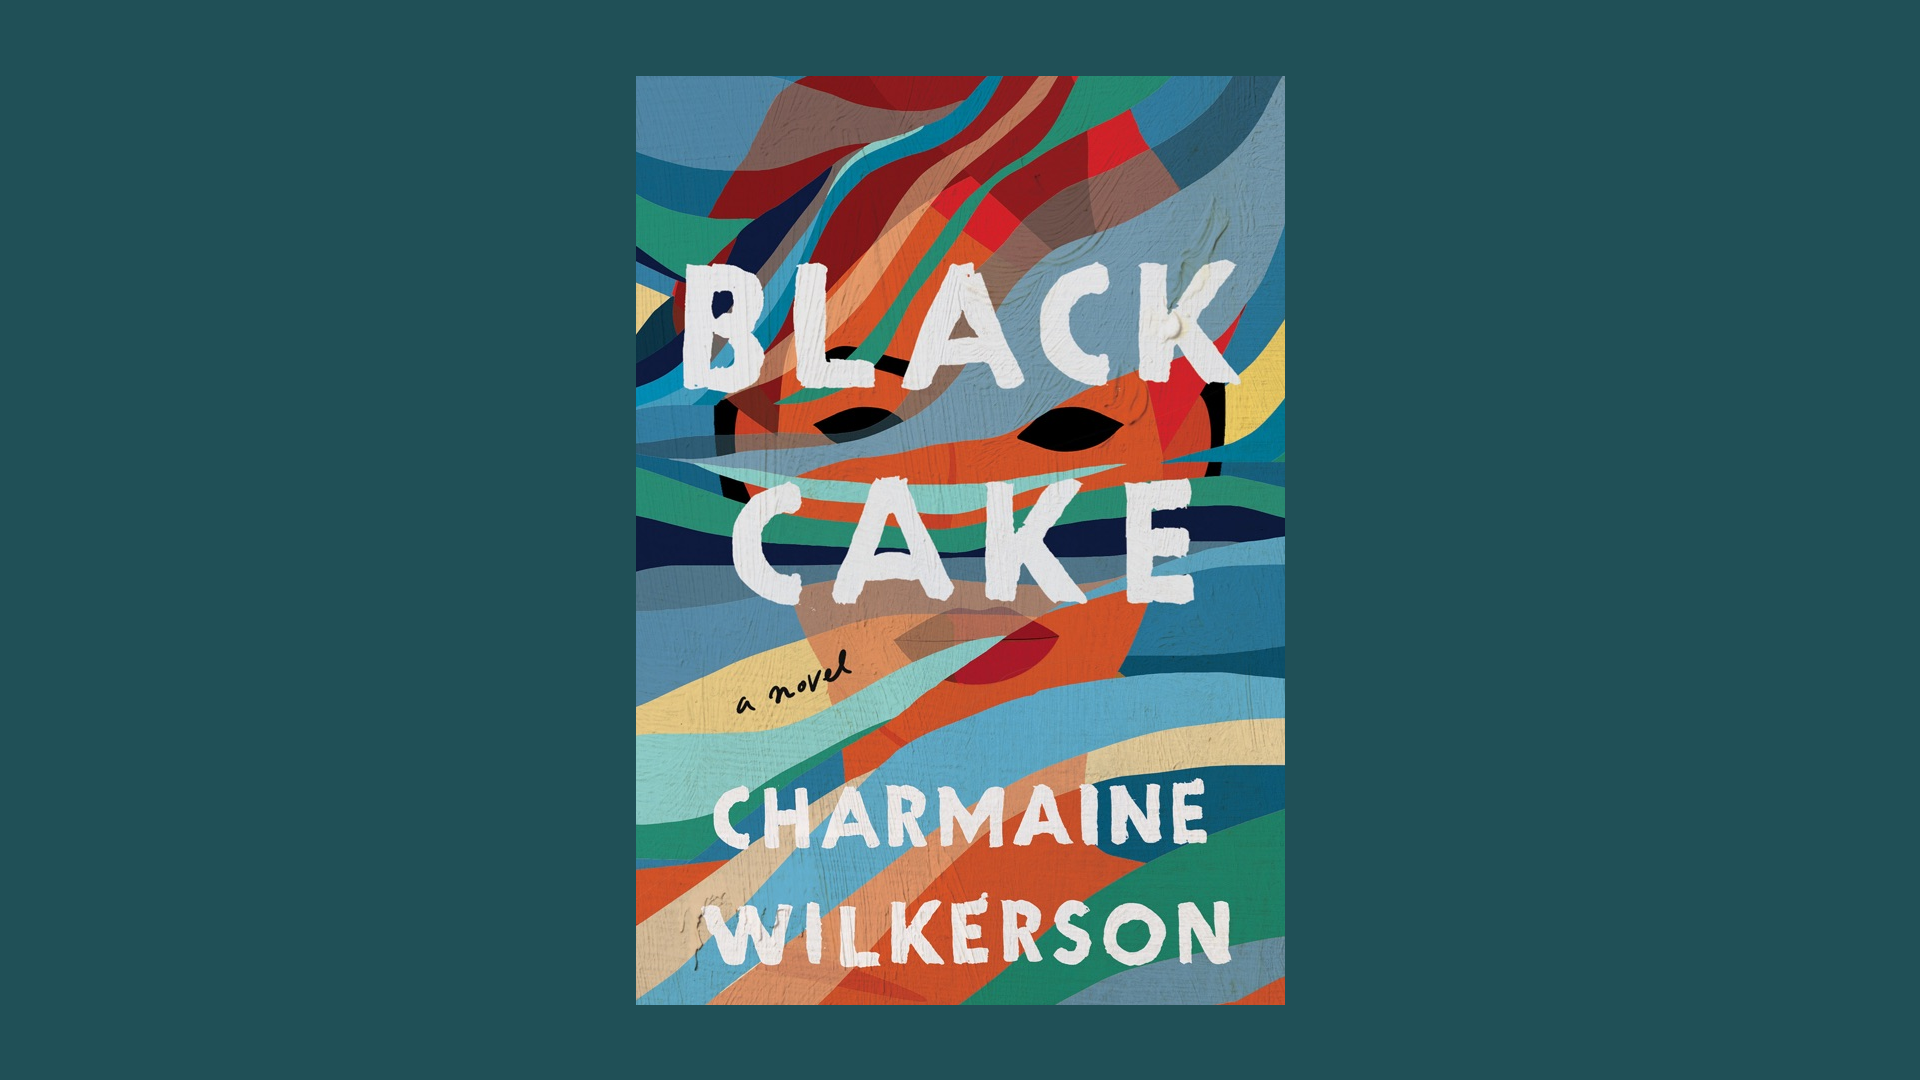 “Black Cake” by Charmaine Wilkerson